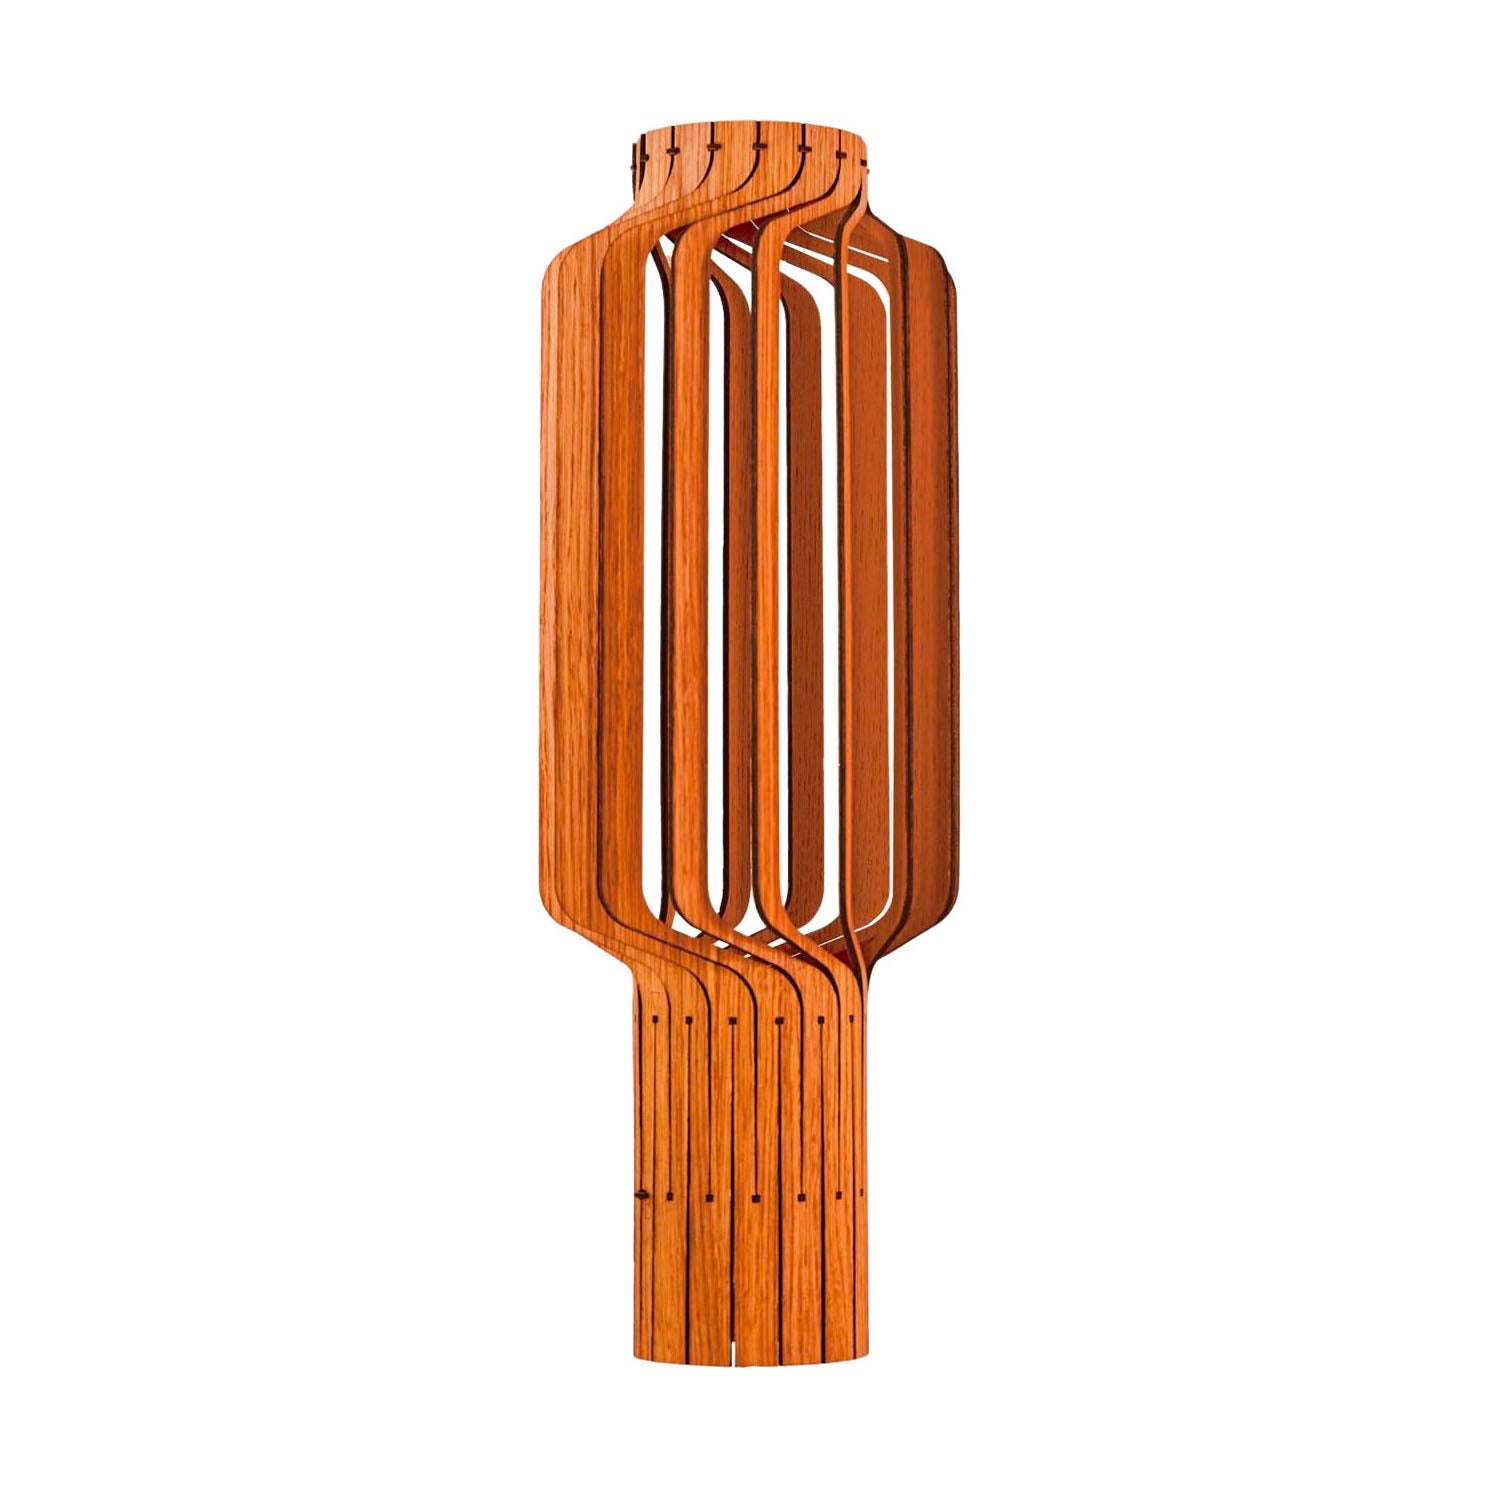 TJINKWE Large - Cage table lamp in natural wood slats